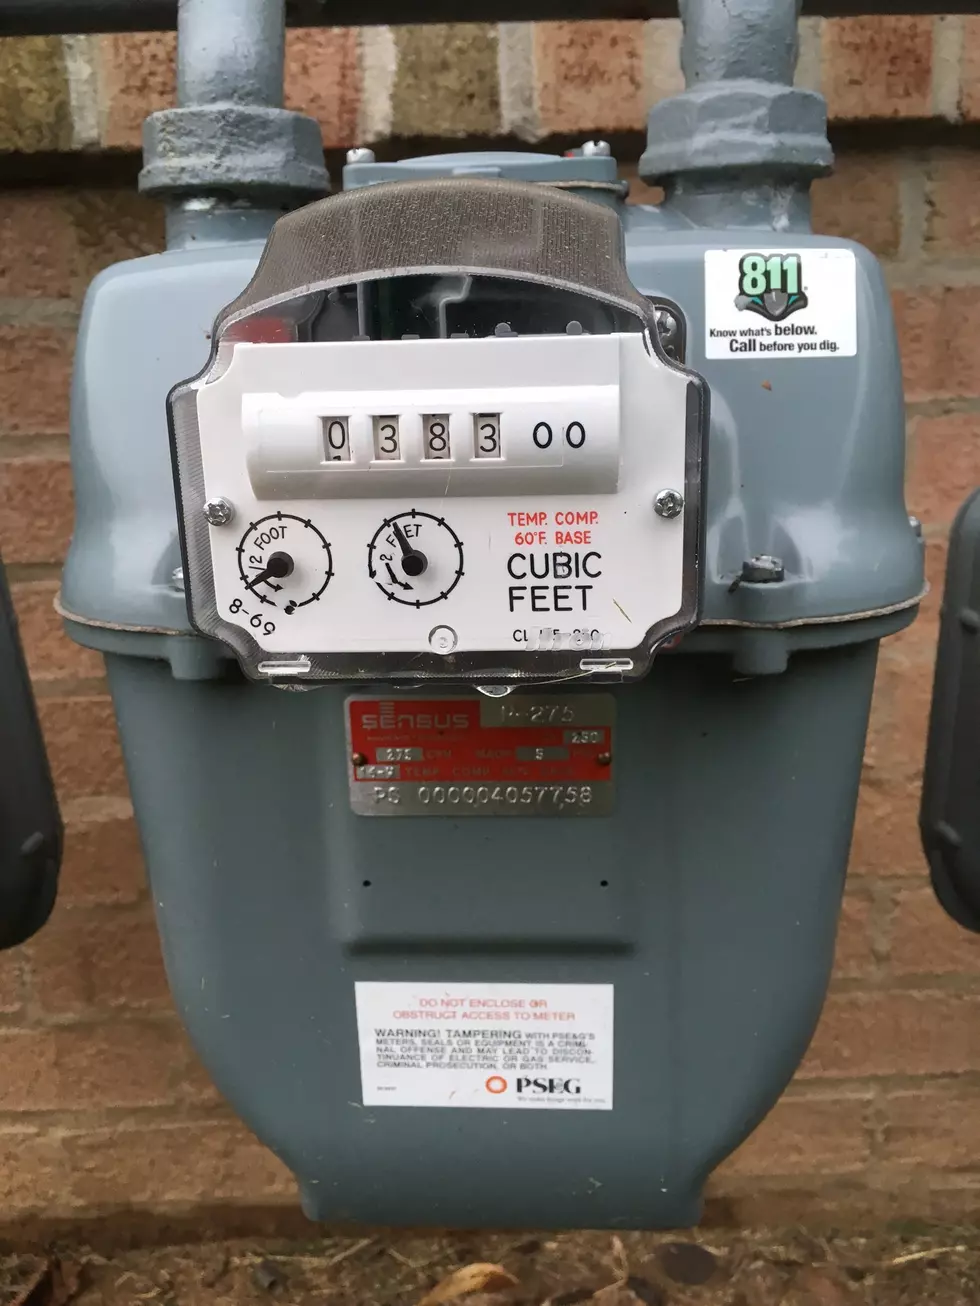 ‘Smart’ meters are powerful tools — but NJ utilities lag in installing them